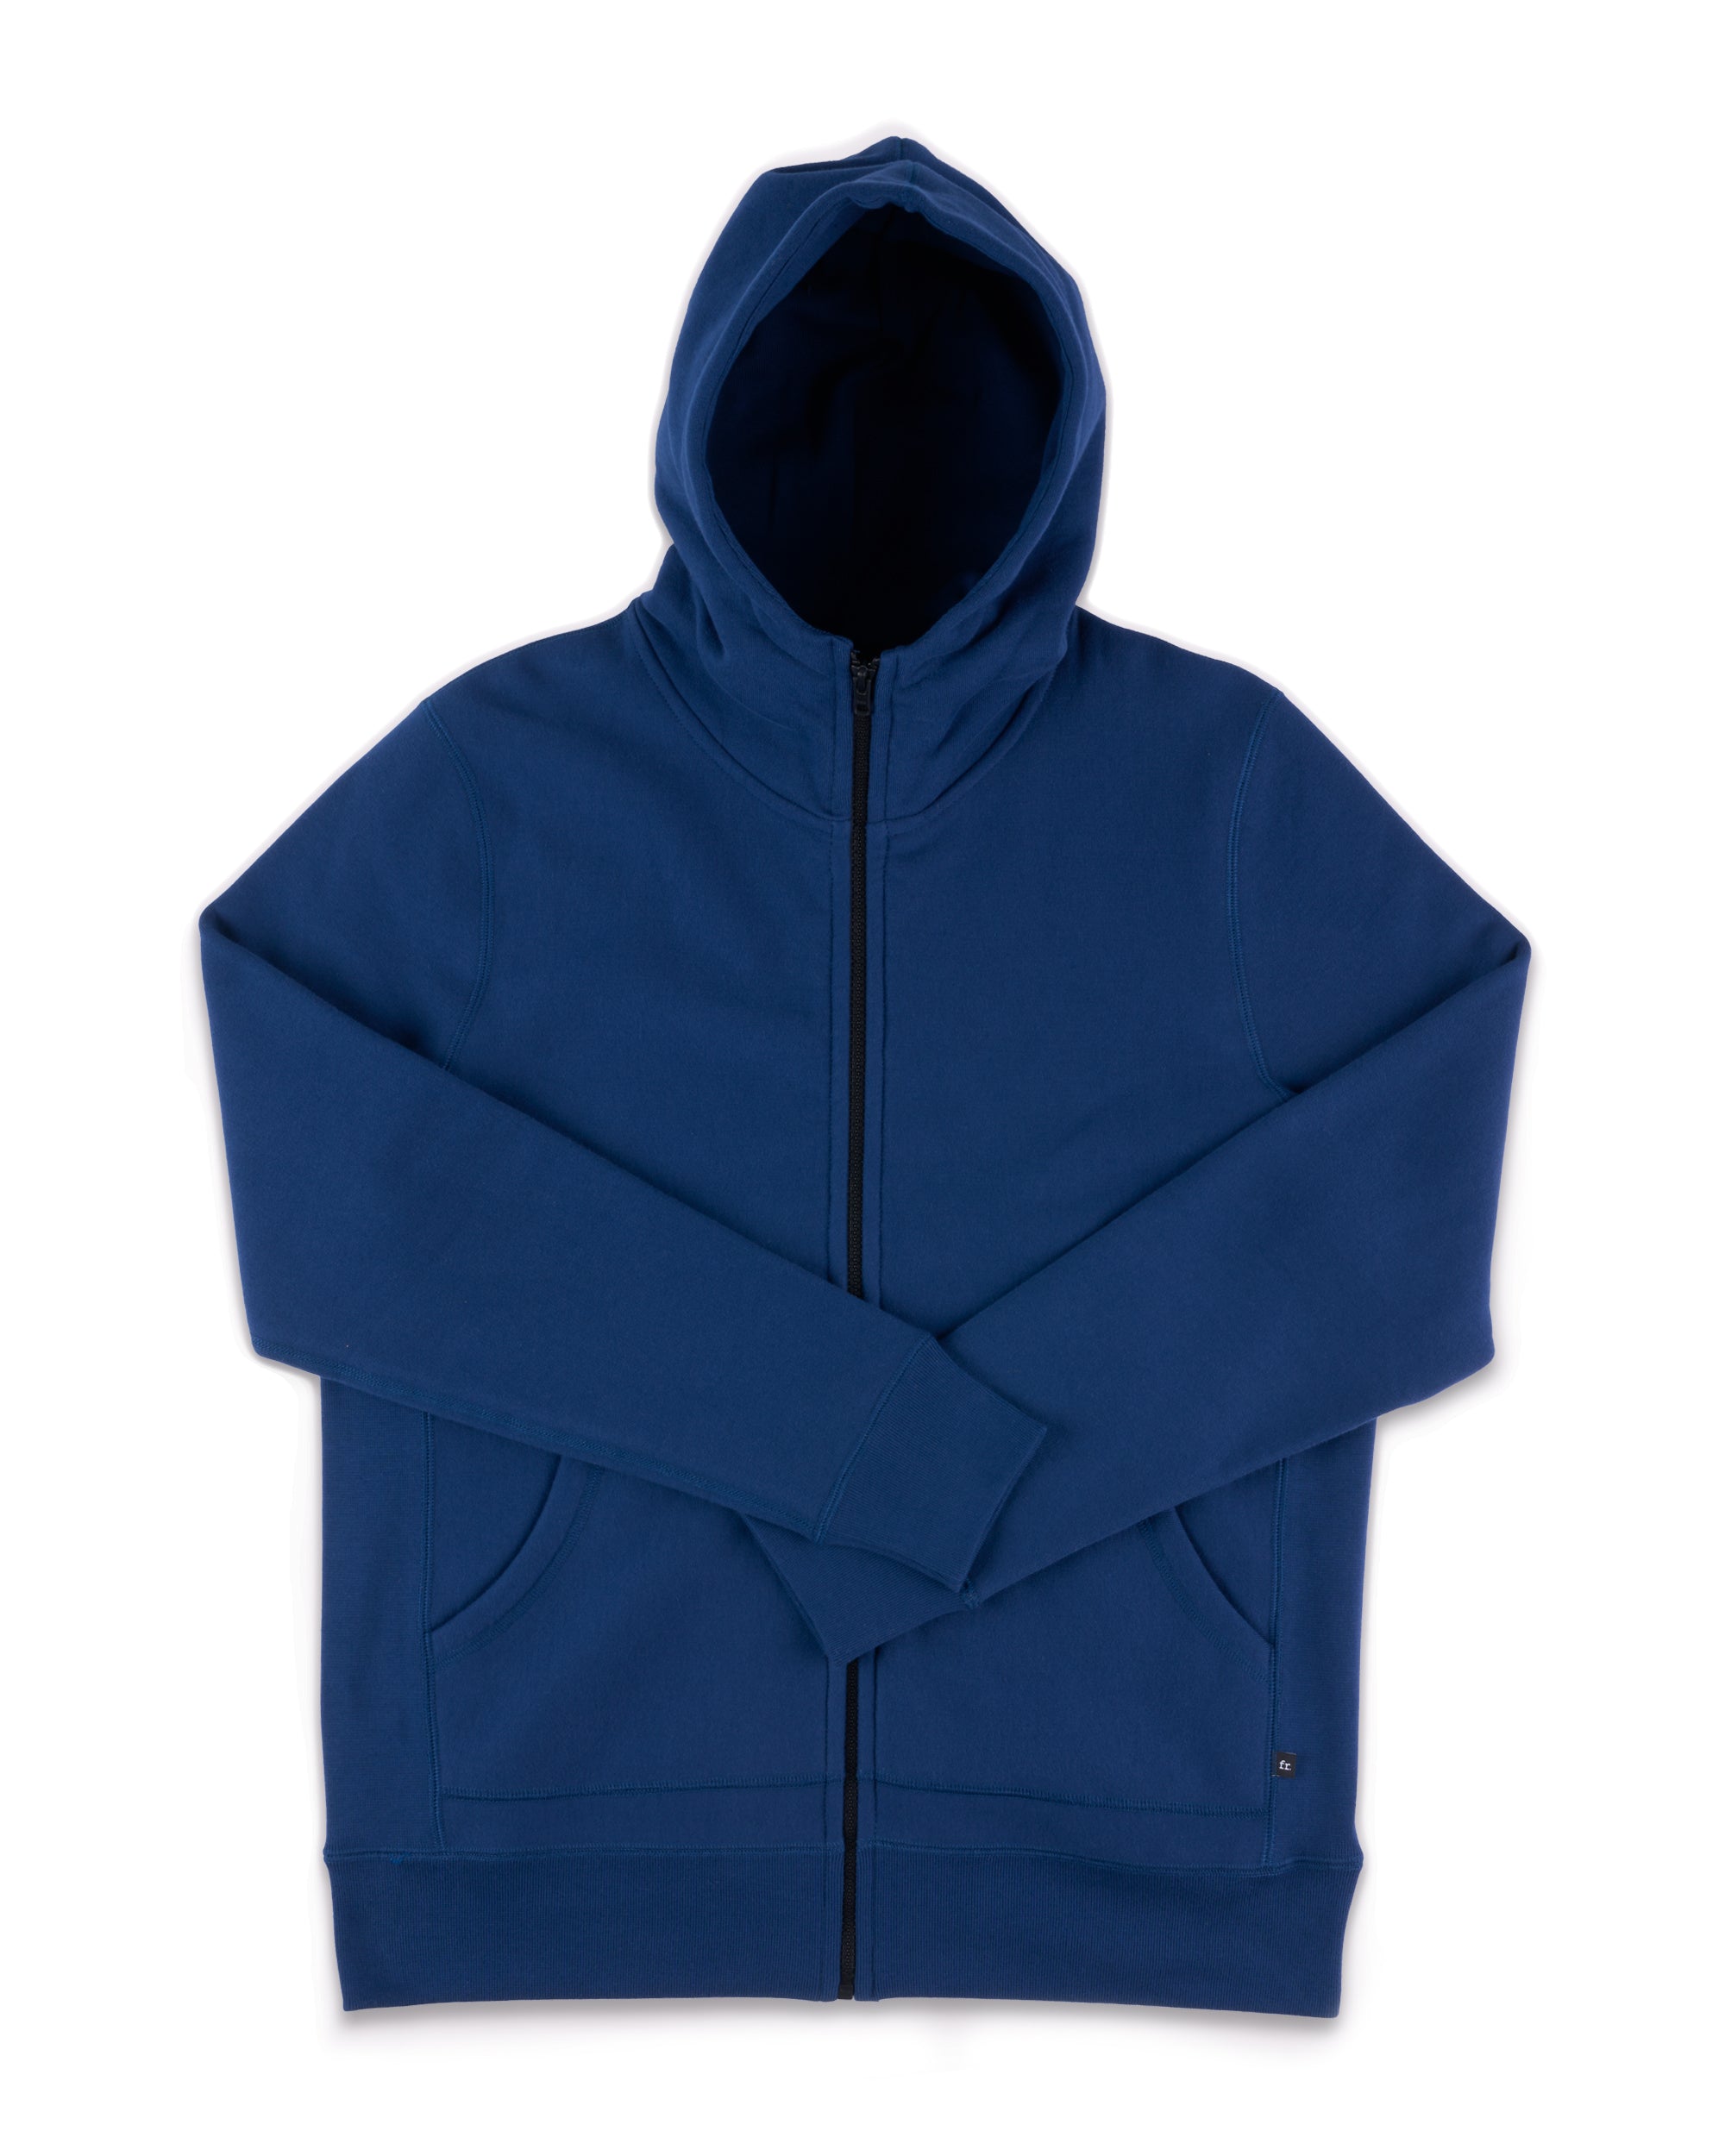 High Neck Hooded Sweatshirt Navy - Foreign Rider Co.